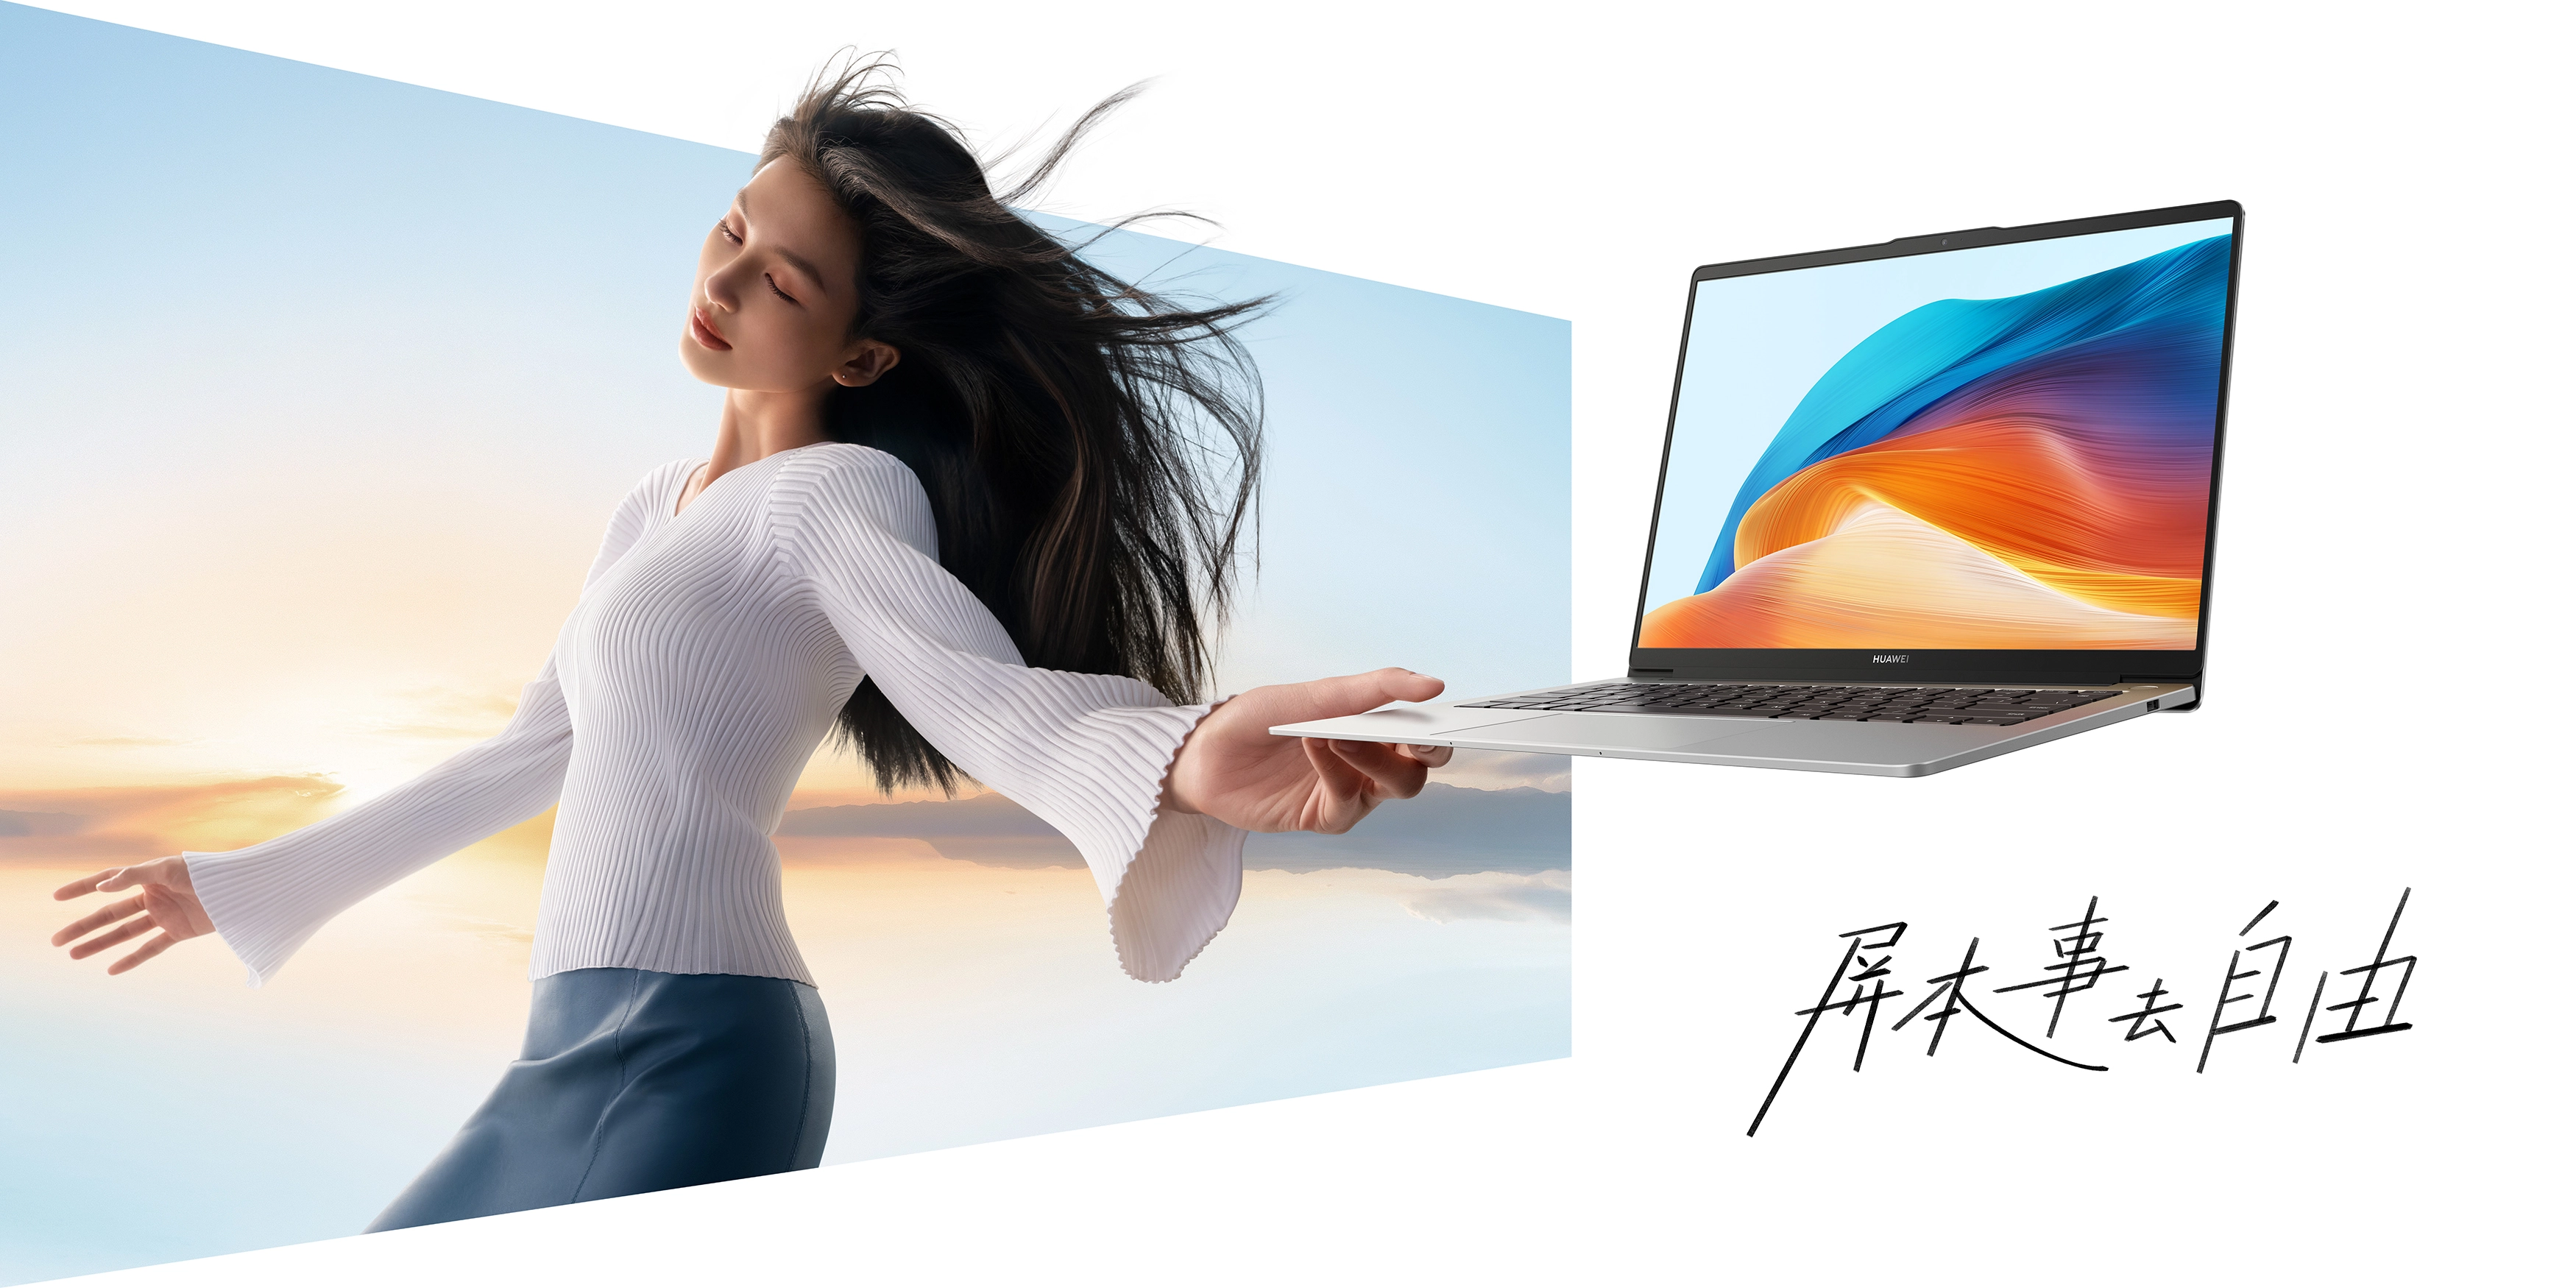 Huawei launches Matebook D14 laptops with Raptor Lake chips from $740